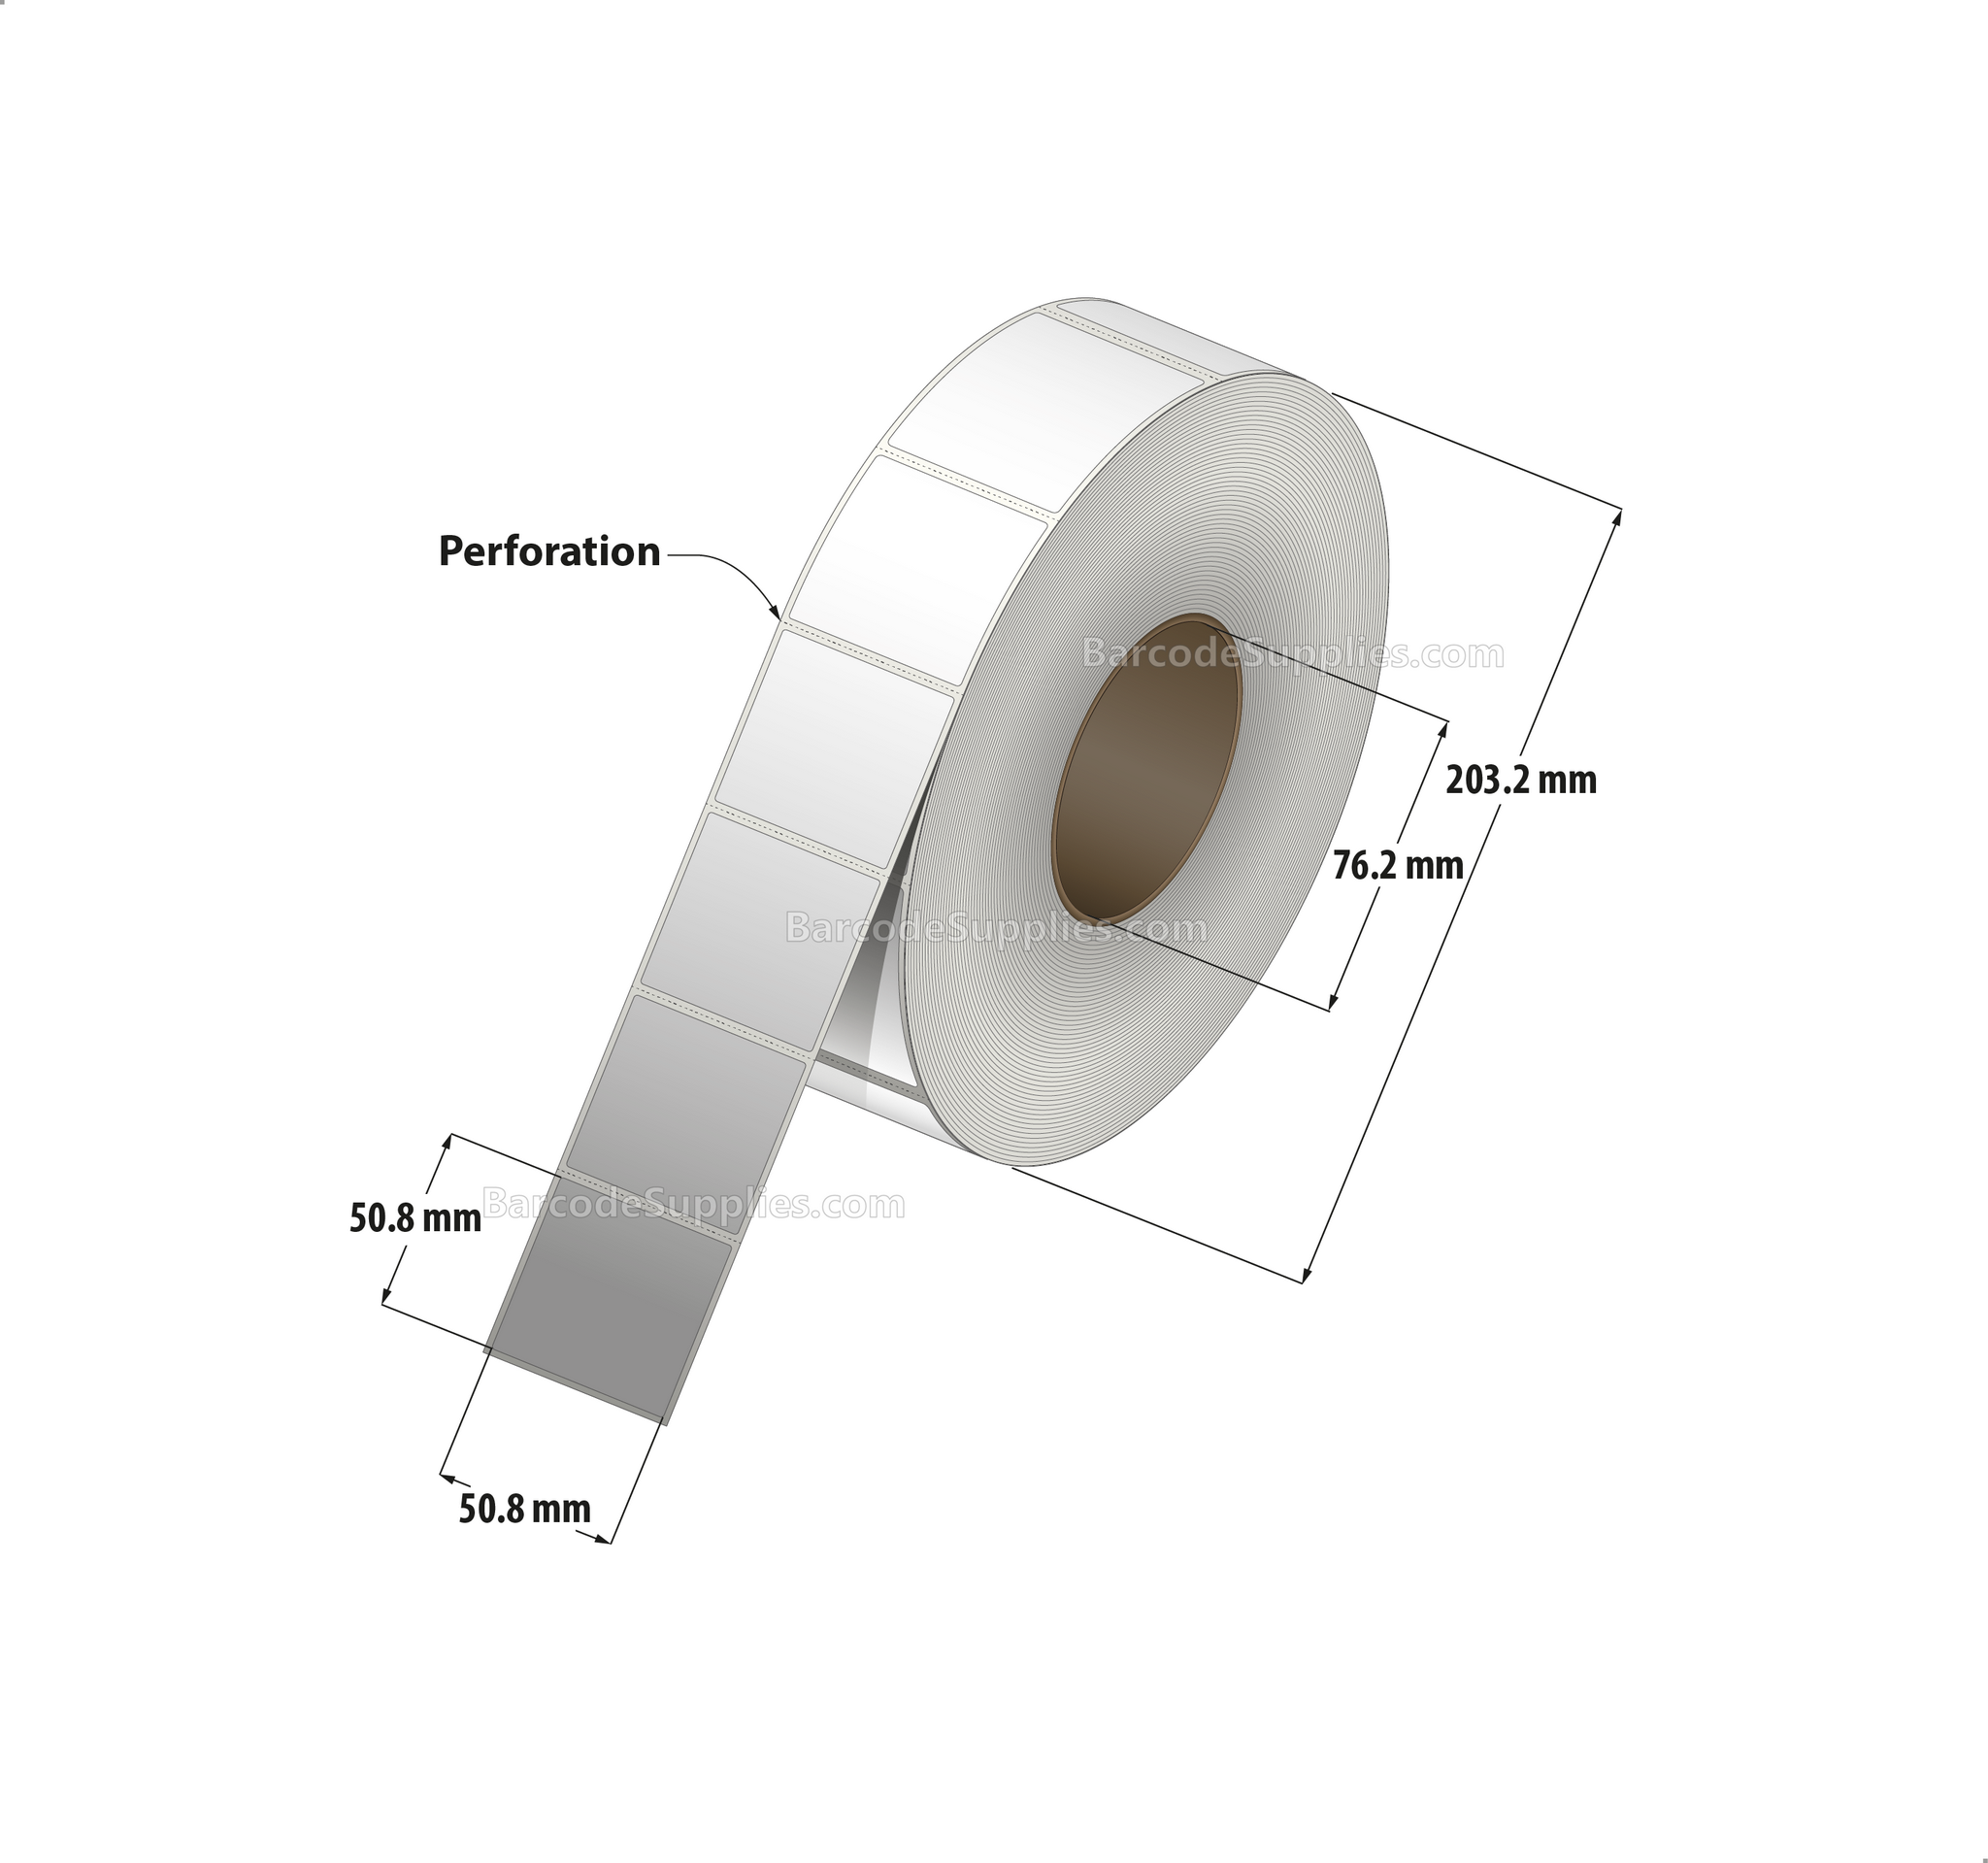 2 x 2 Direct Thermal White Labels With Acrylic Adhesive - Perforated - 2900 Labels Per Roll - Carton Of 8 Rolls - 23200 Labels Total - MPN: RD-2-2-2900-3 - BarcodeSource, Inc.